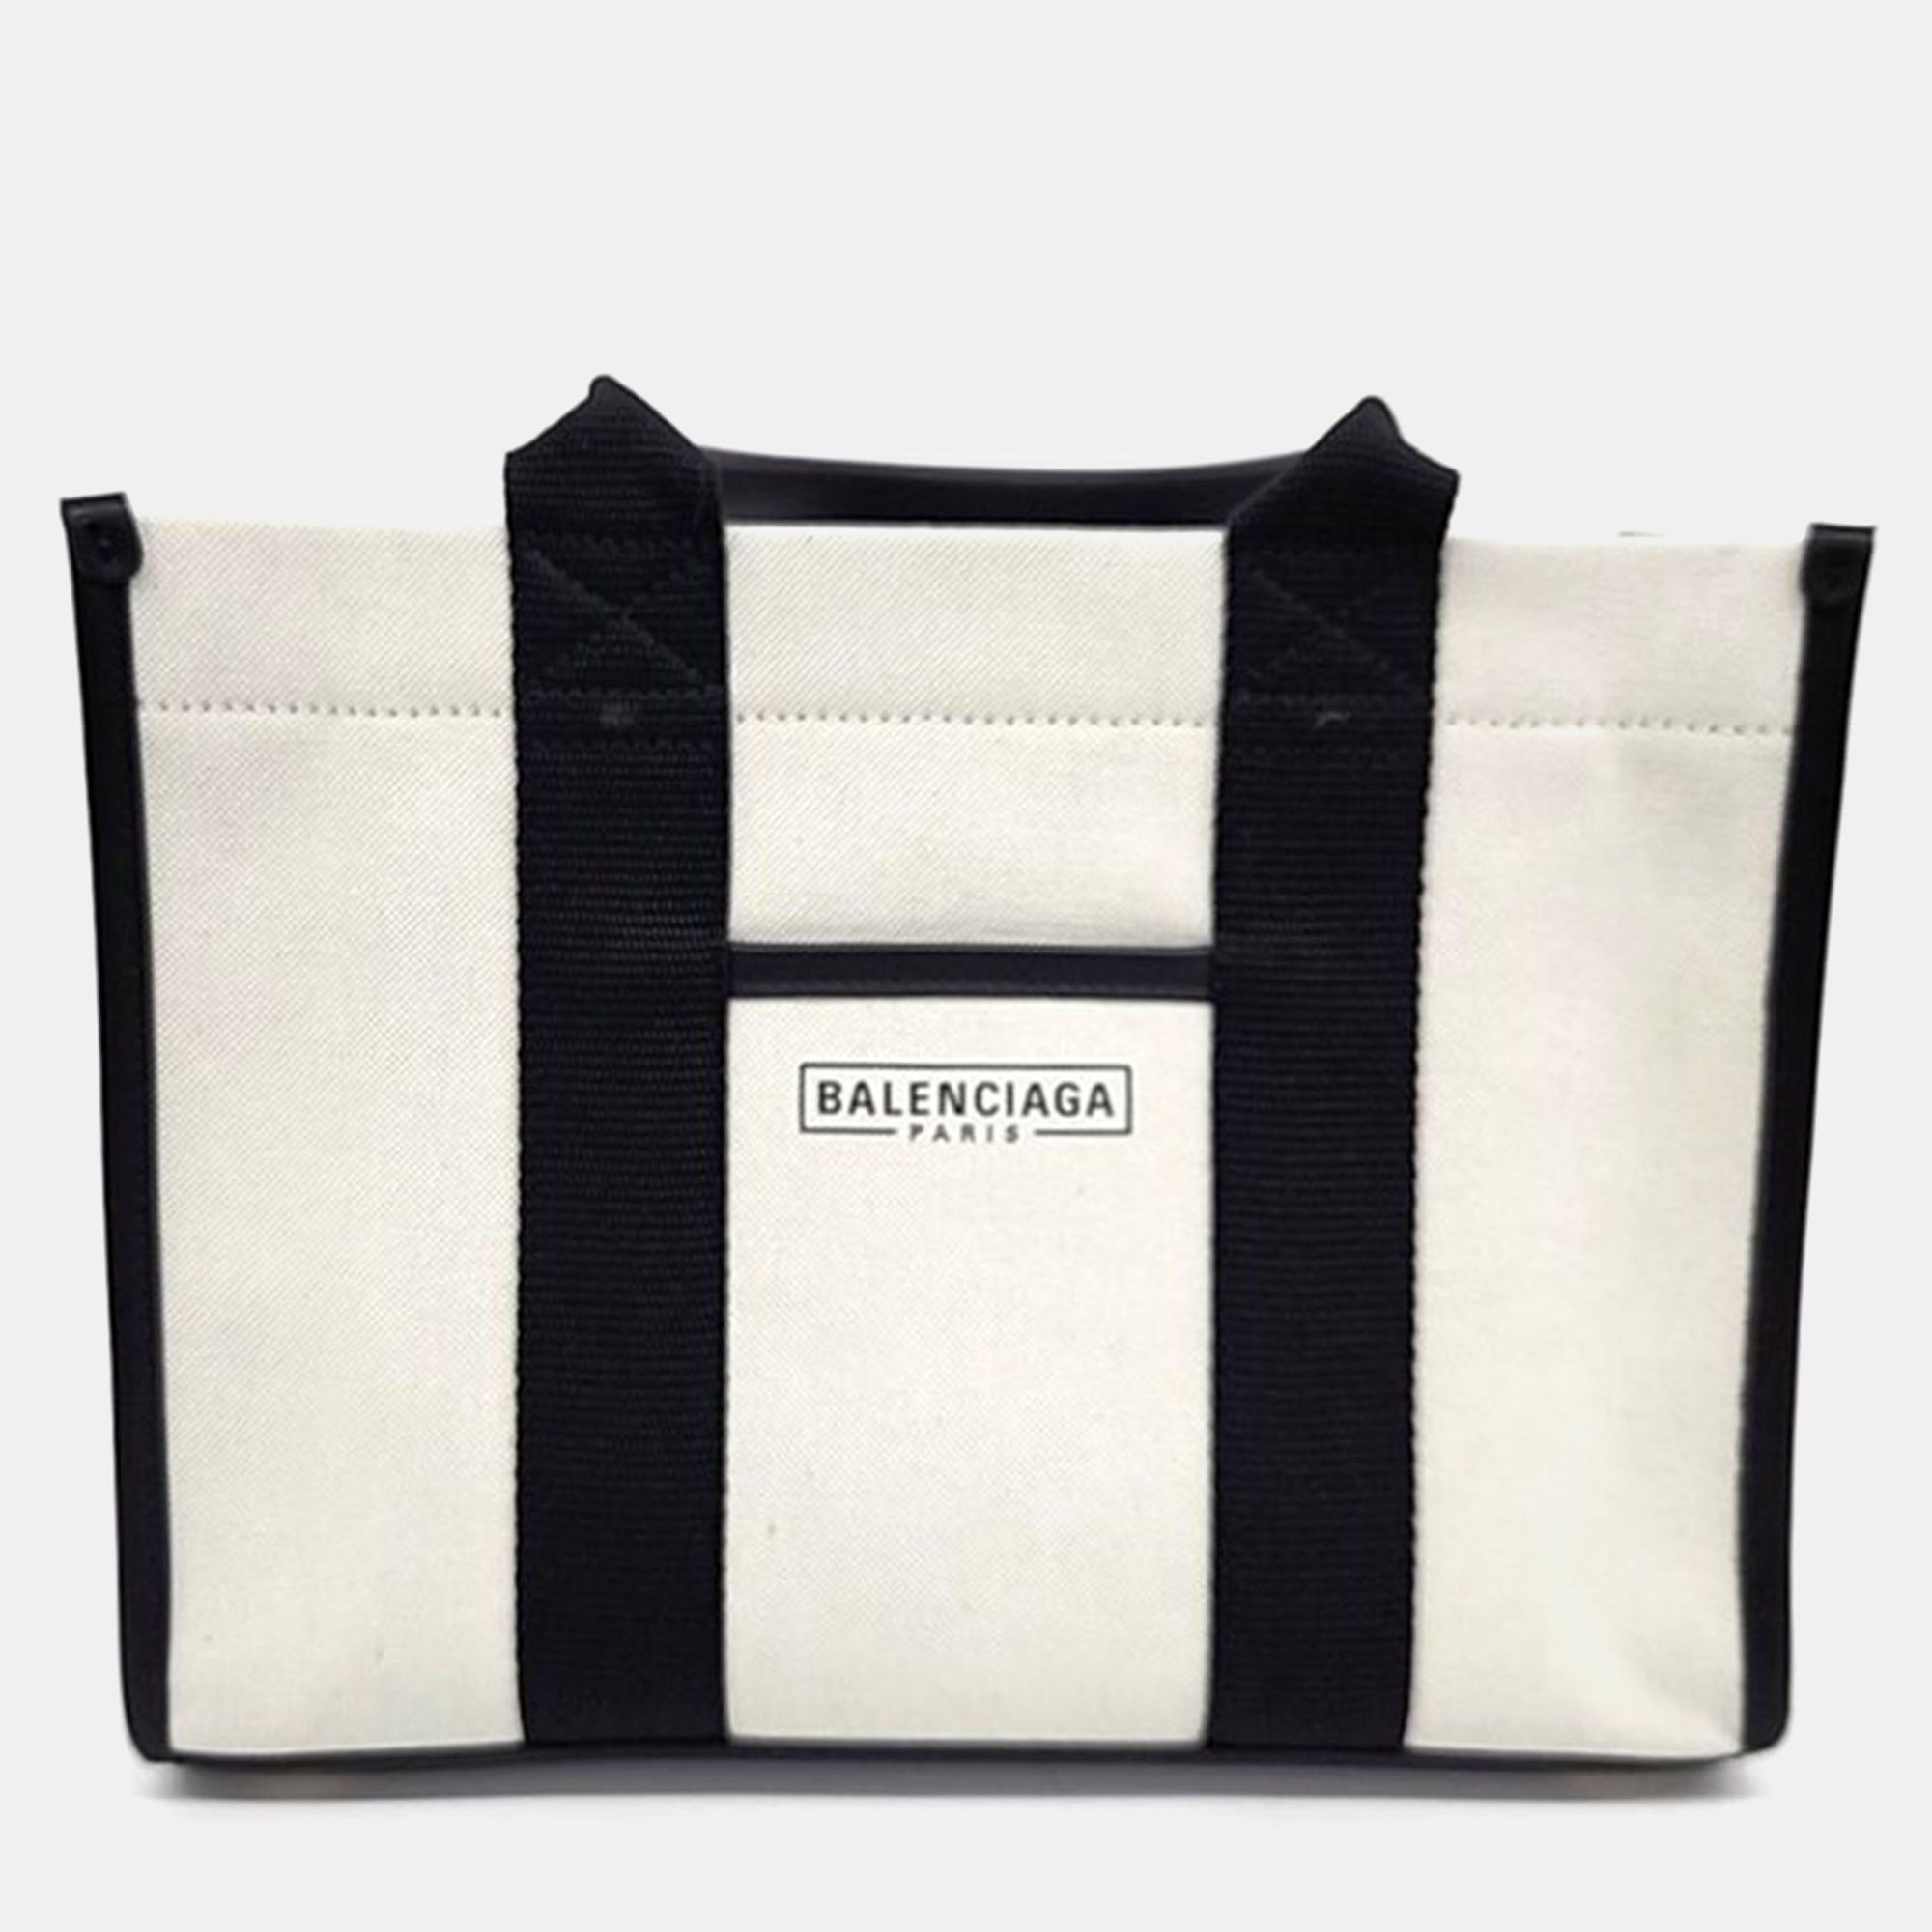 Balenciaga black/ivory canvas and leather small hardware tote bag